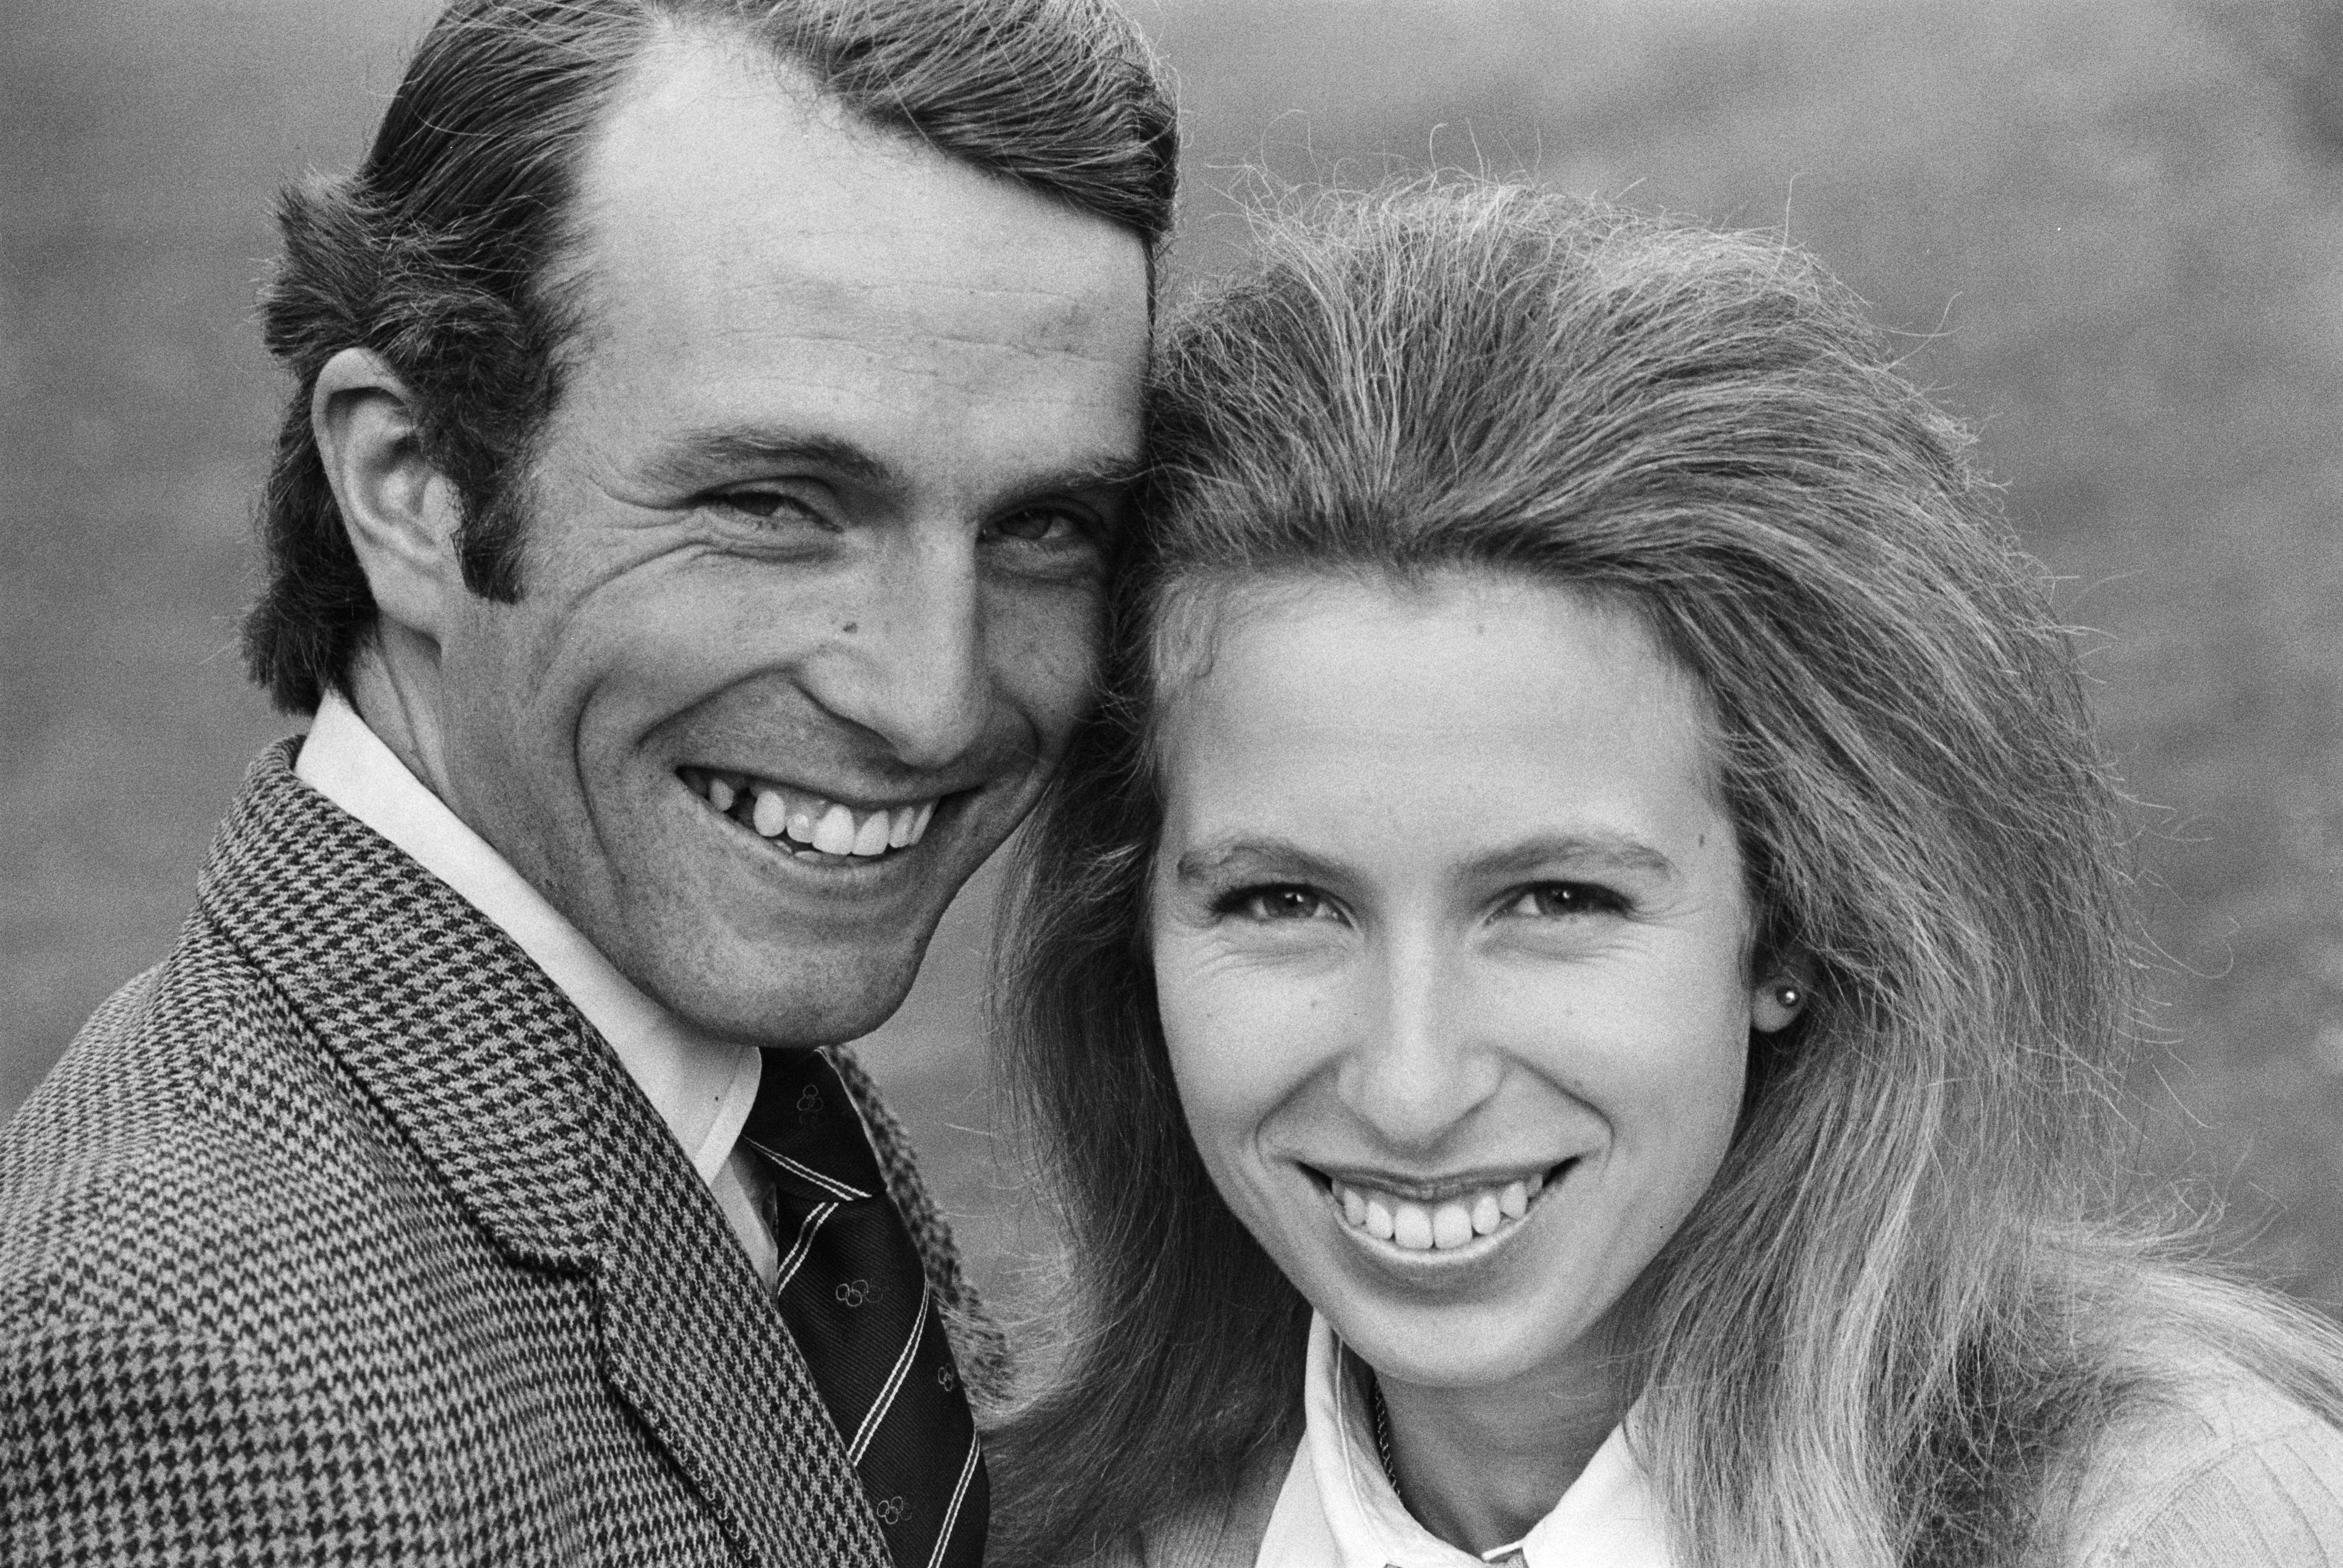 Princess Anne with Captain Mark Phillips just prior to their marriage on 22nd July 1973. | Source: Getty Images